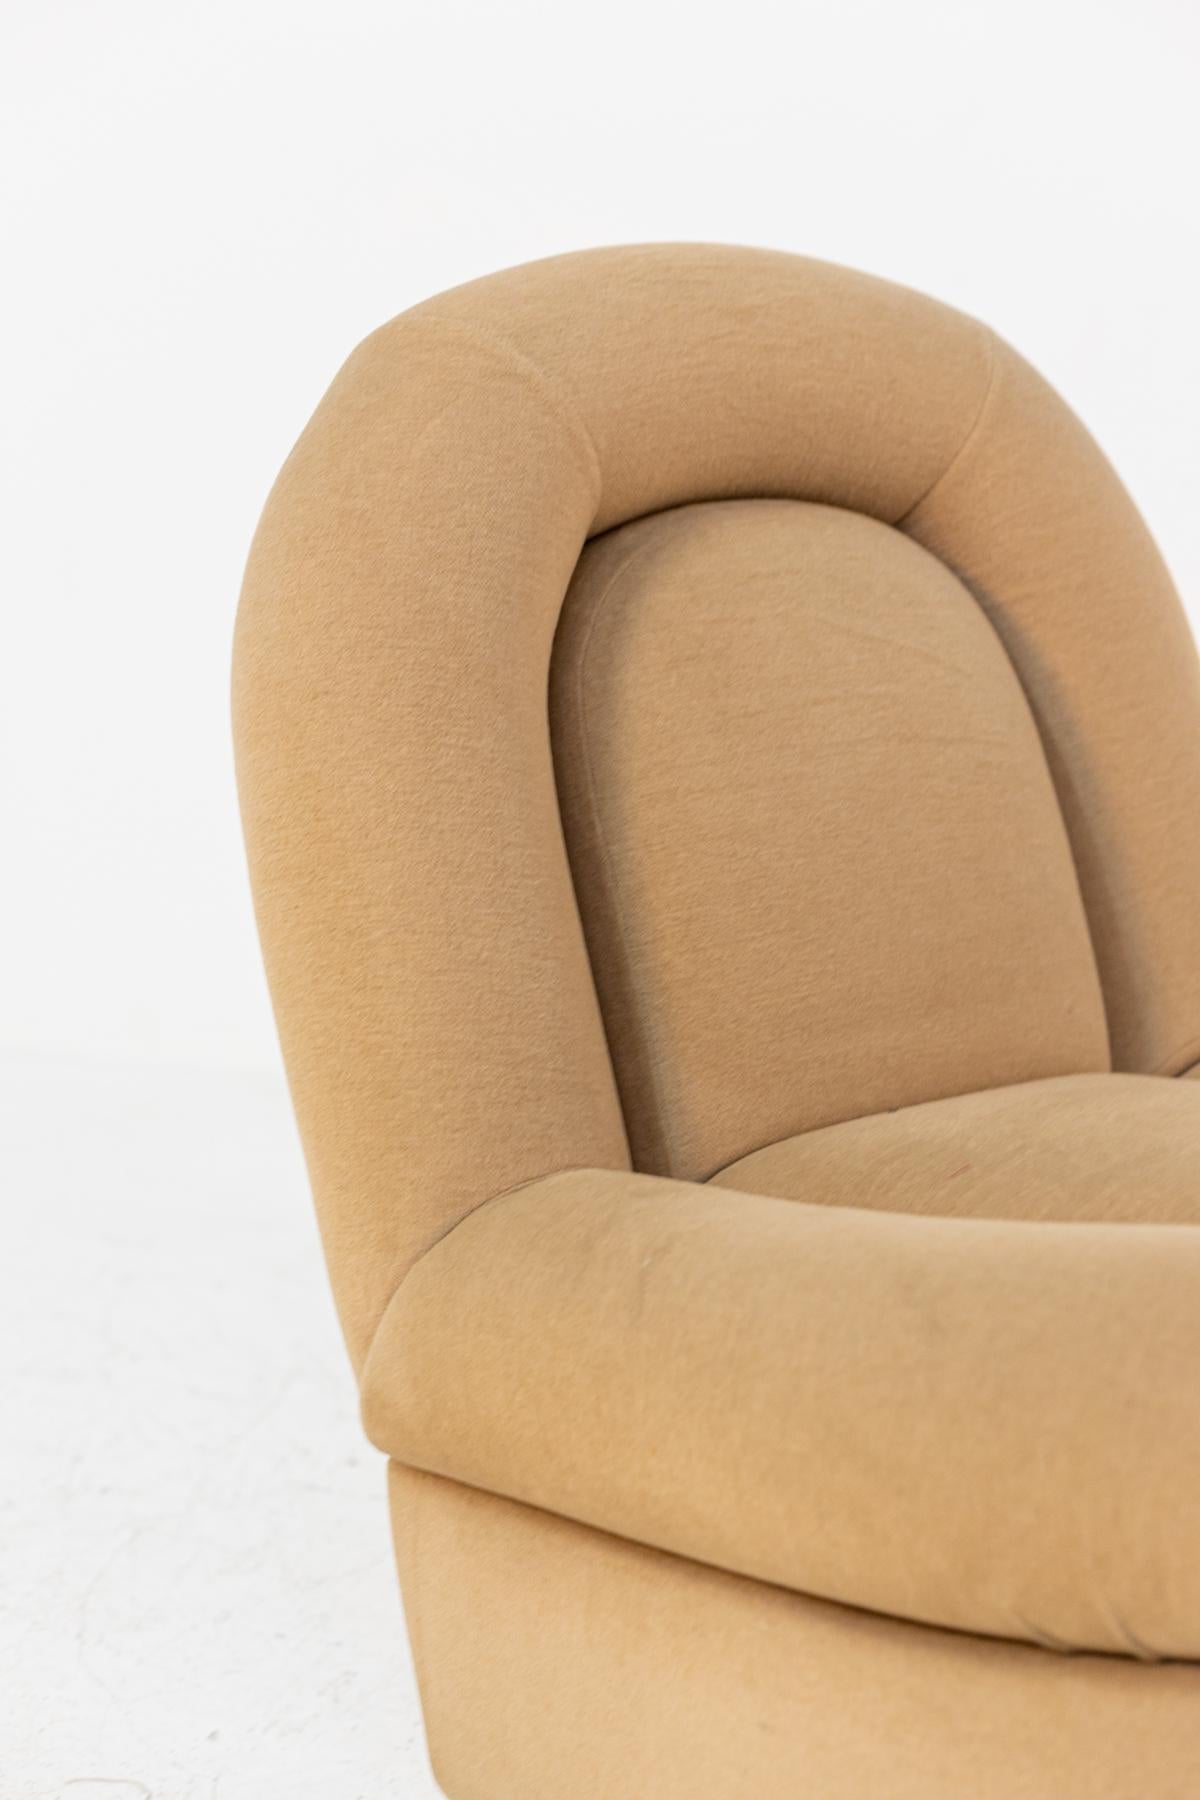 Single vintage Italian velvet armchair from the 1970s.
The armchair is upholstered in original light brown velvet of the period and is in perfect condition.
The feet of the armchair are made of brass and are circular in shape, giving it a special